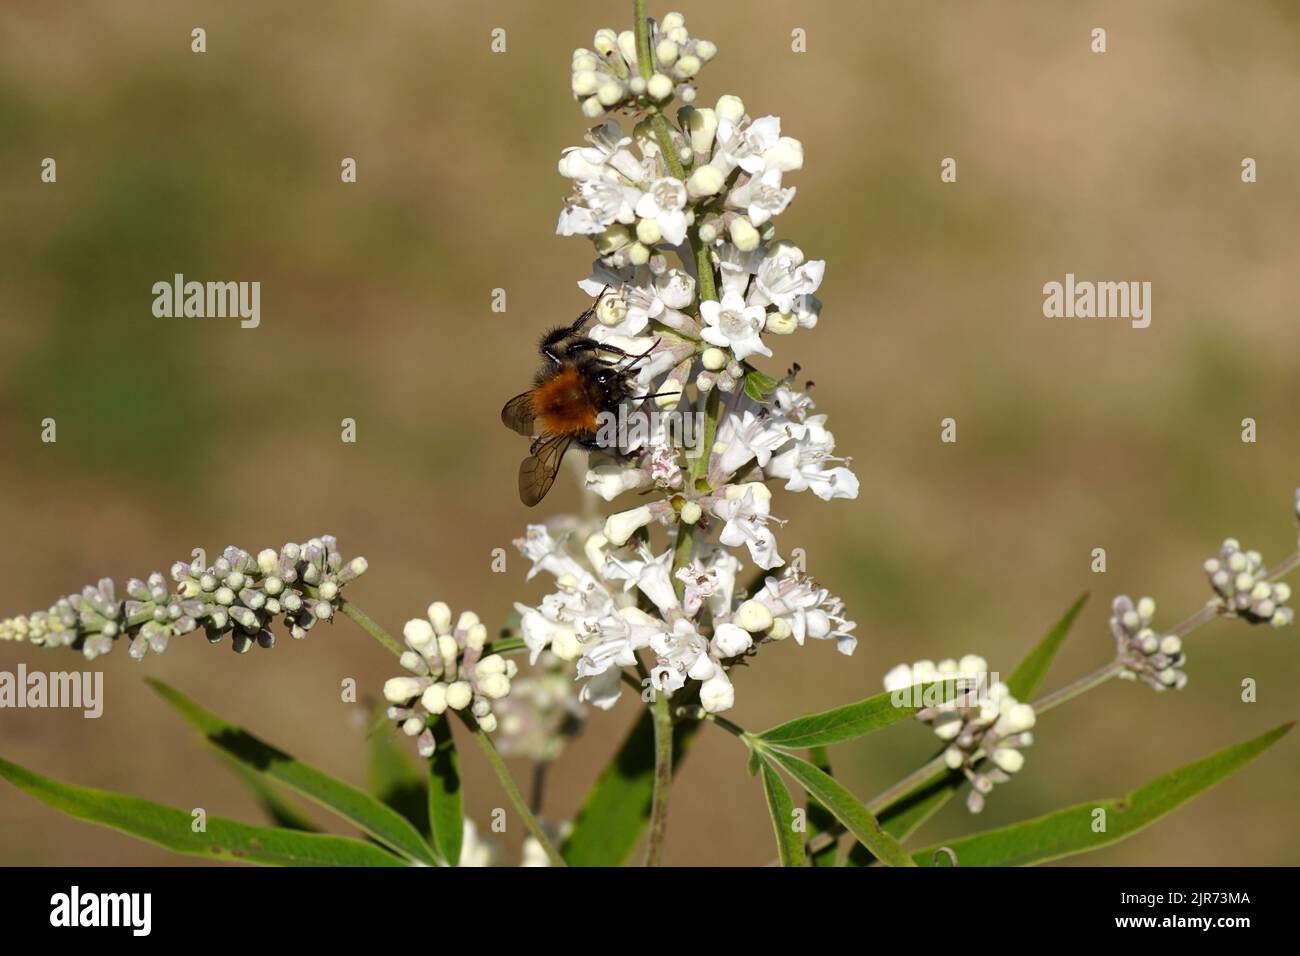 Common carder bee (Bombus pascuorum), family Apidae. On a flowers of Chasteberry, Abraham's balm, lilac chastetree, monk's pepper (Vitex agnus castus Stock Photo